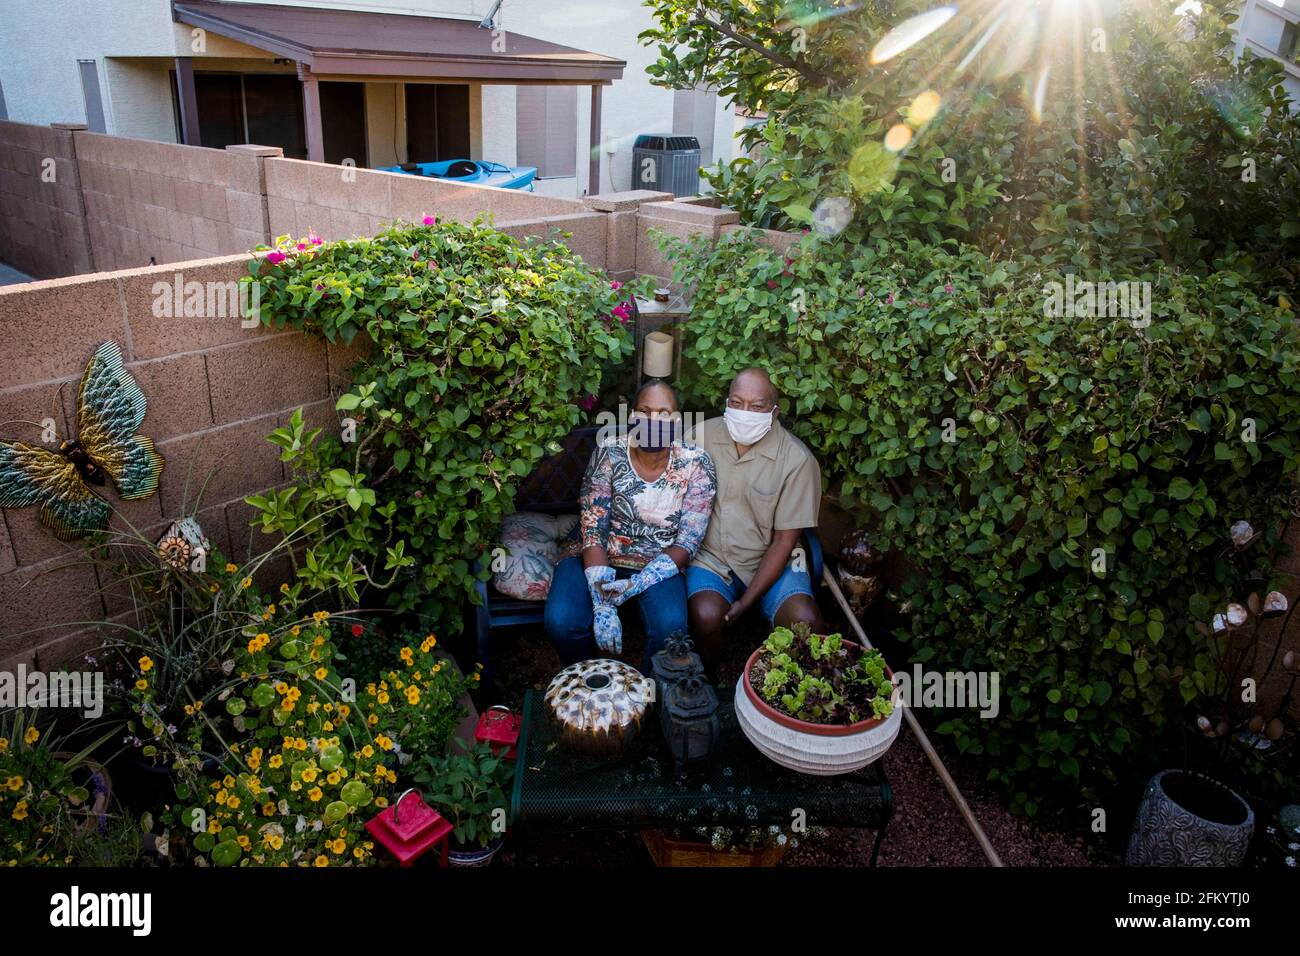 Gilbert, Arizona, USA. 18th May, 2020. When the pandemic lockdown hit, JEWEL and JAMES SHELTON simply got busier, and taking their backyard oasis and sanctuary to a much higher level. In the middle of Gilbert Arizona, they created a lush green tableau where they could escape the walls of their home that contained them as they isolated from the world to stay healthy during the COVID-19 Pandemic. 'Having a beautiful garden sanctuary in my backyard helps with my sanity, during these stressful times.' Credit: Rick D'Elia/ZUMA Wire/Alamy Live News Stock Photo